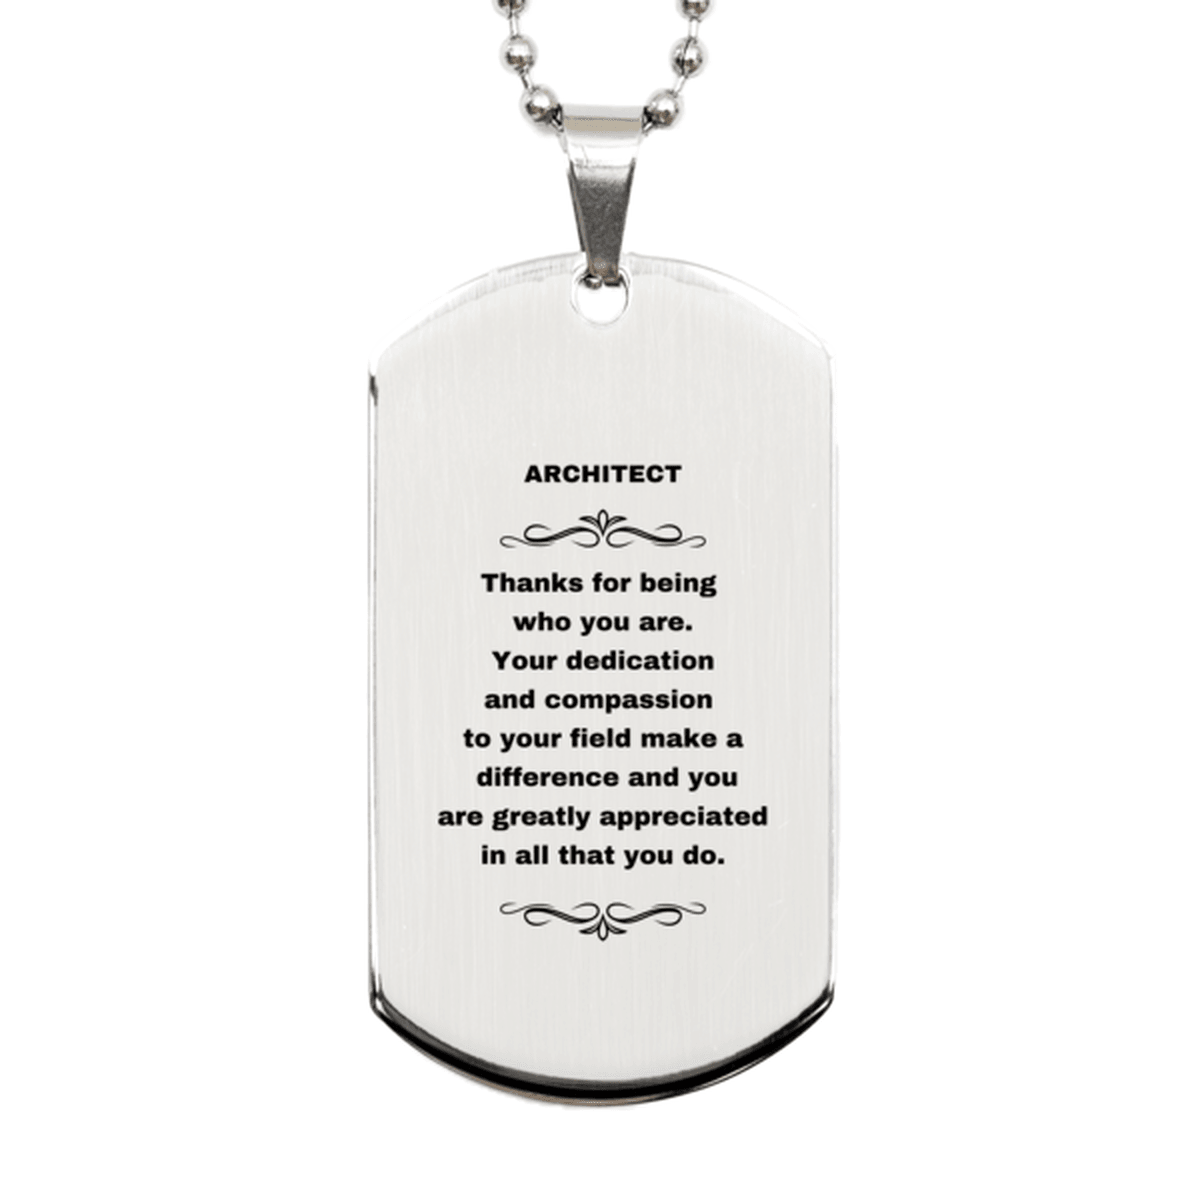 Architect Silver Dog Tag Engraved Necklace - Thanks for being who you are - Birthday Christmas Jewelry Gifts Coworkers Colleague Boss - Mallard Moon Gift Shop